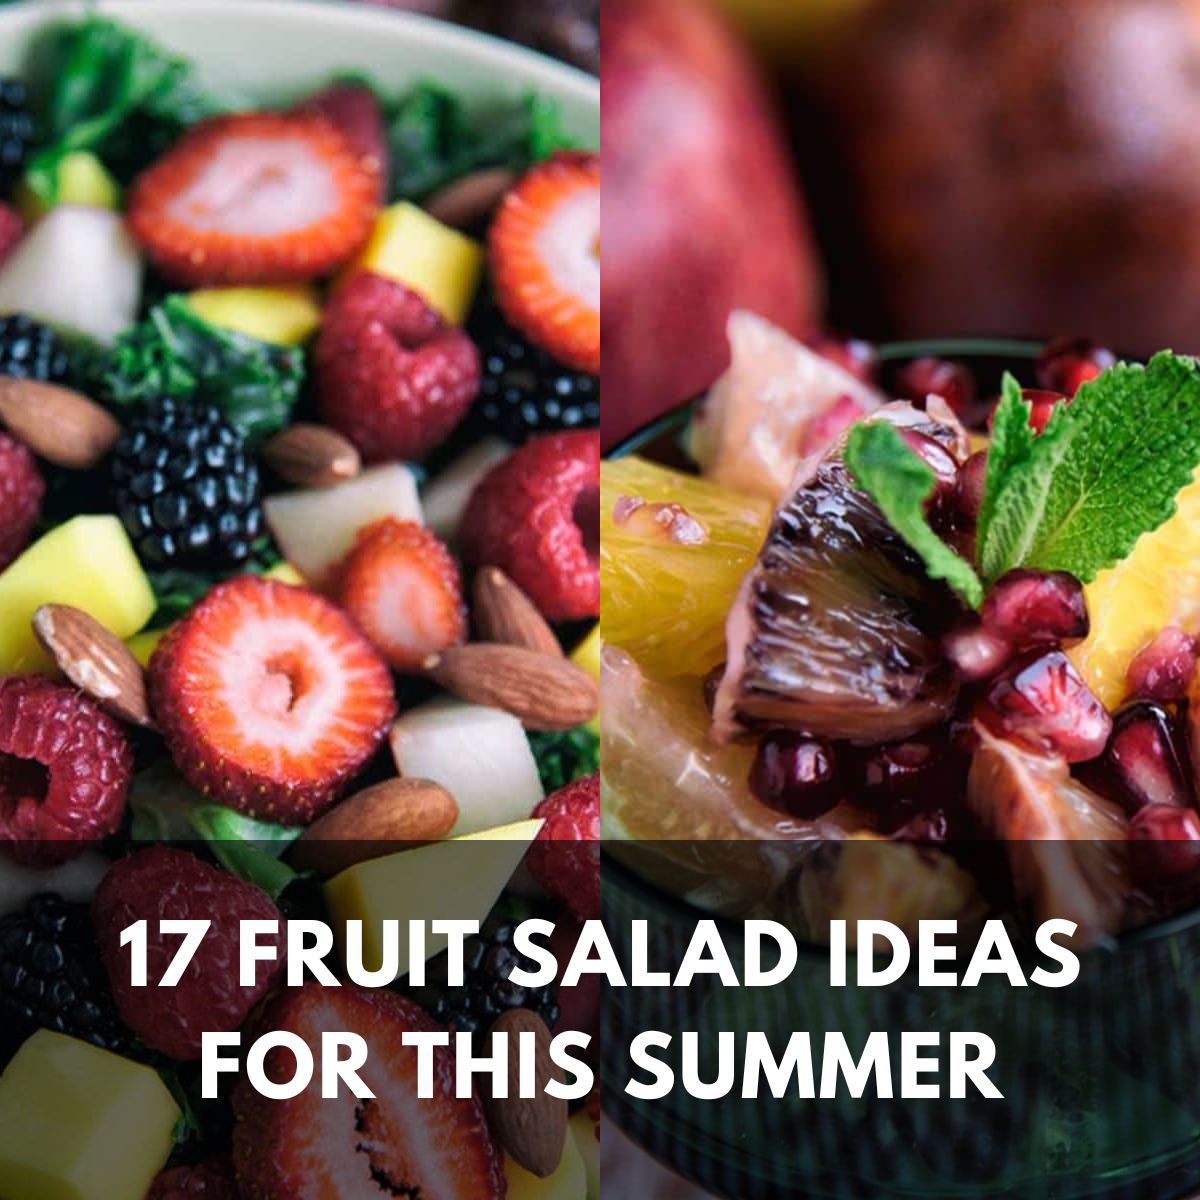 17 fruit salad ideas for this summer main